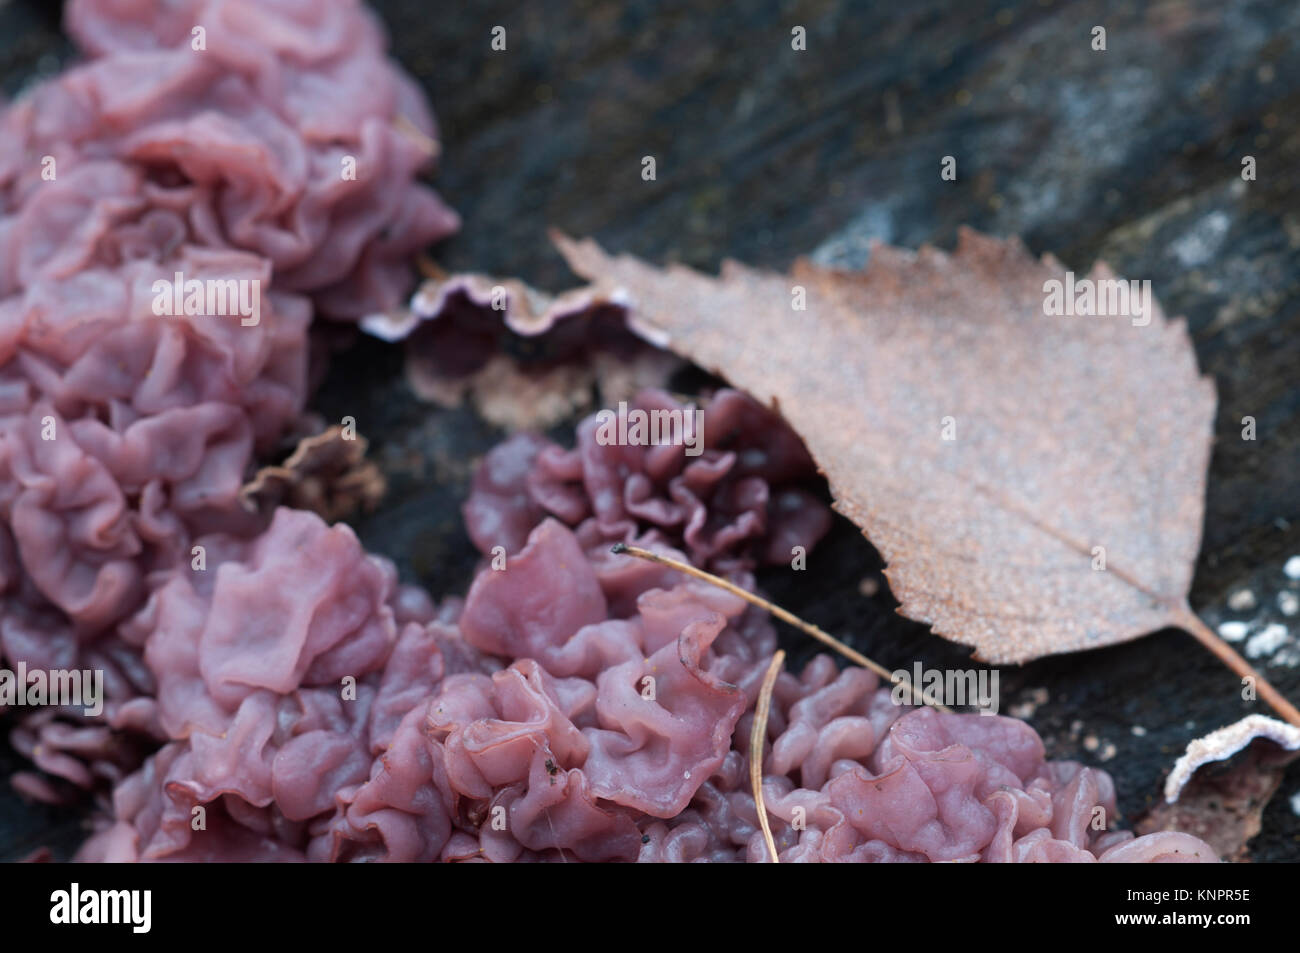 Ascocoryne sarcoides mushrooms (slime mould) on an old stump Stock Photo